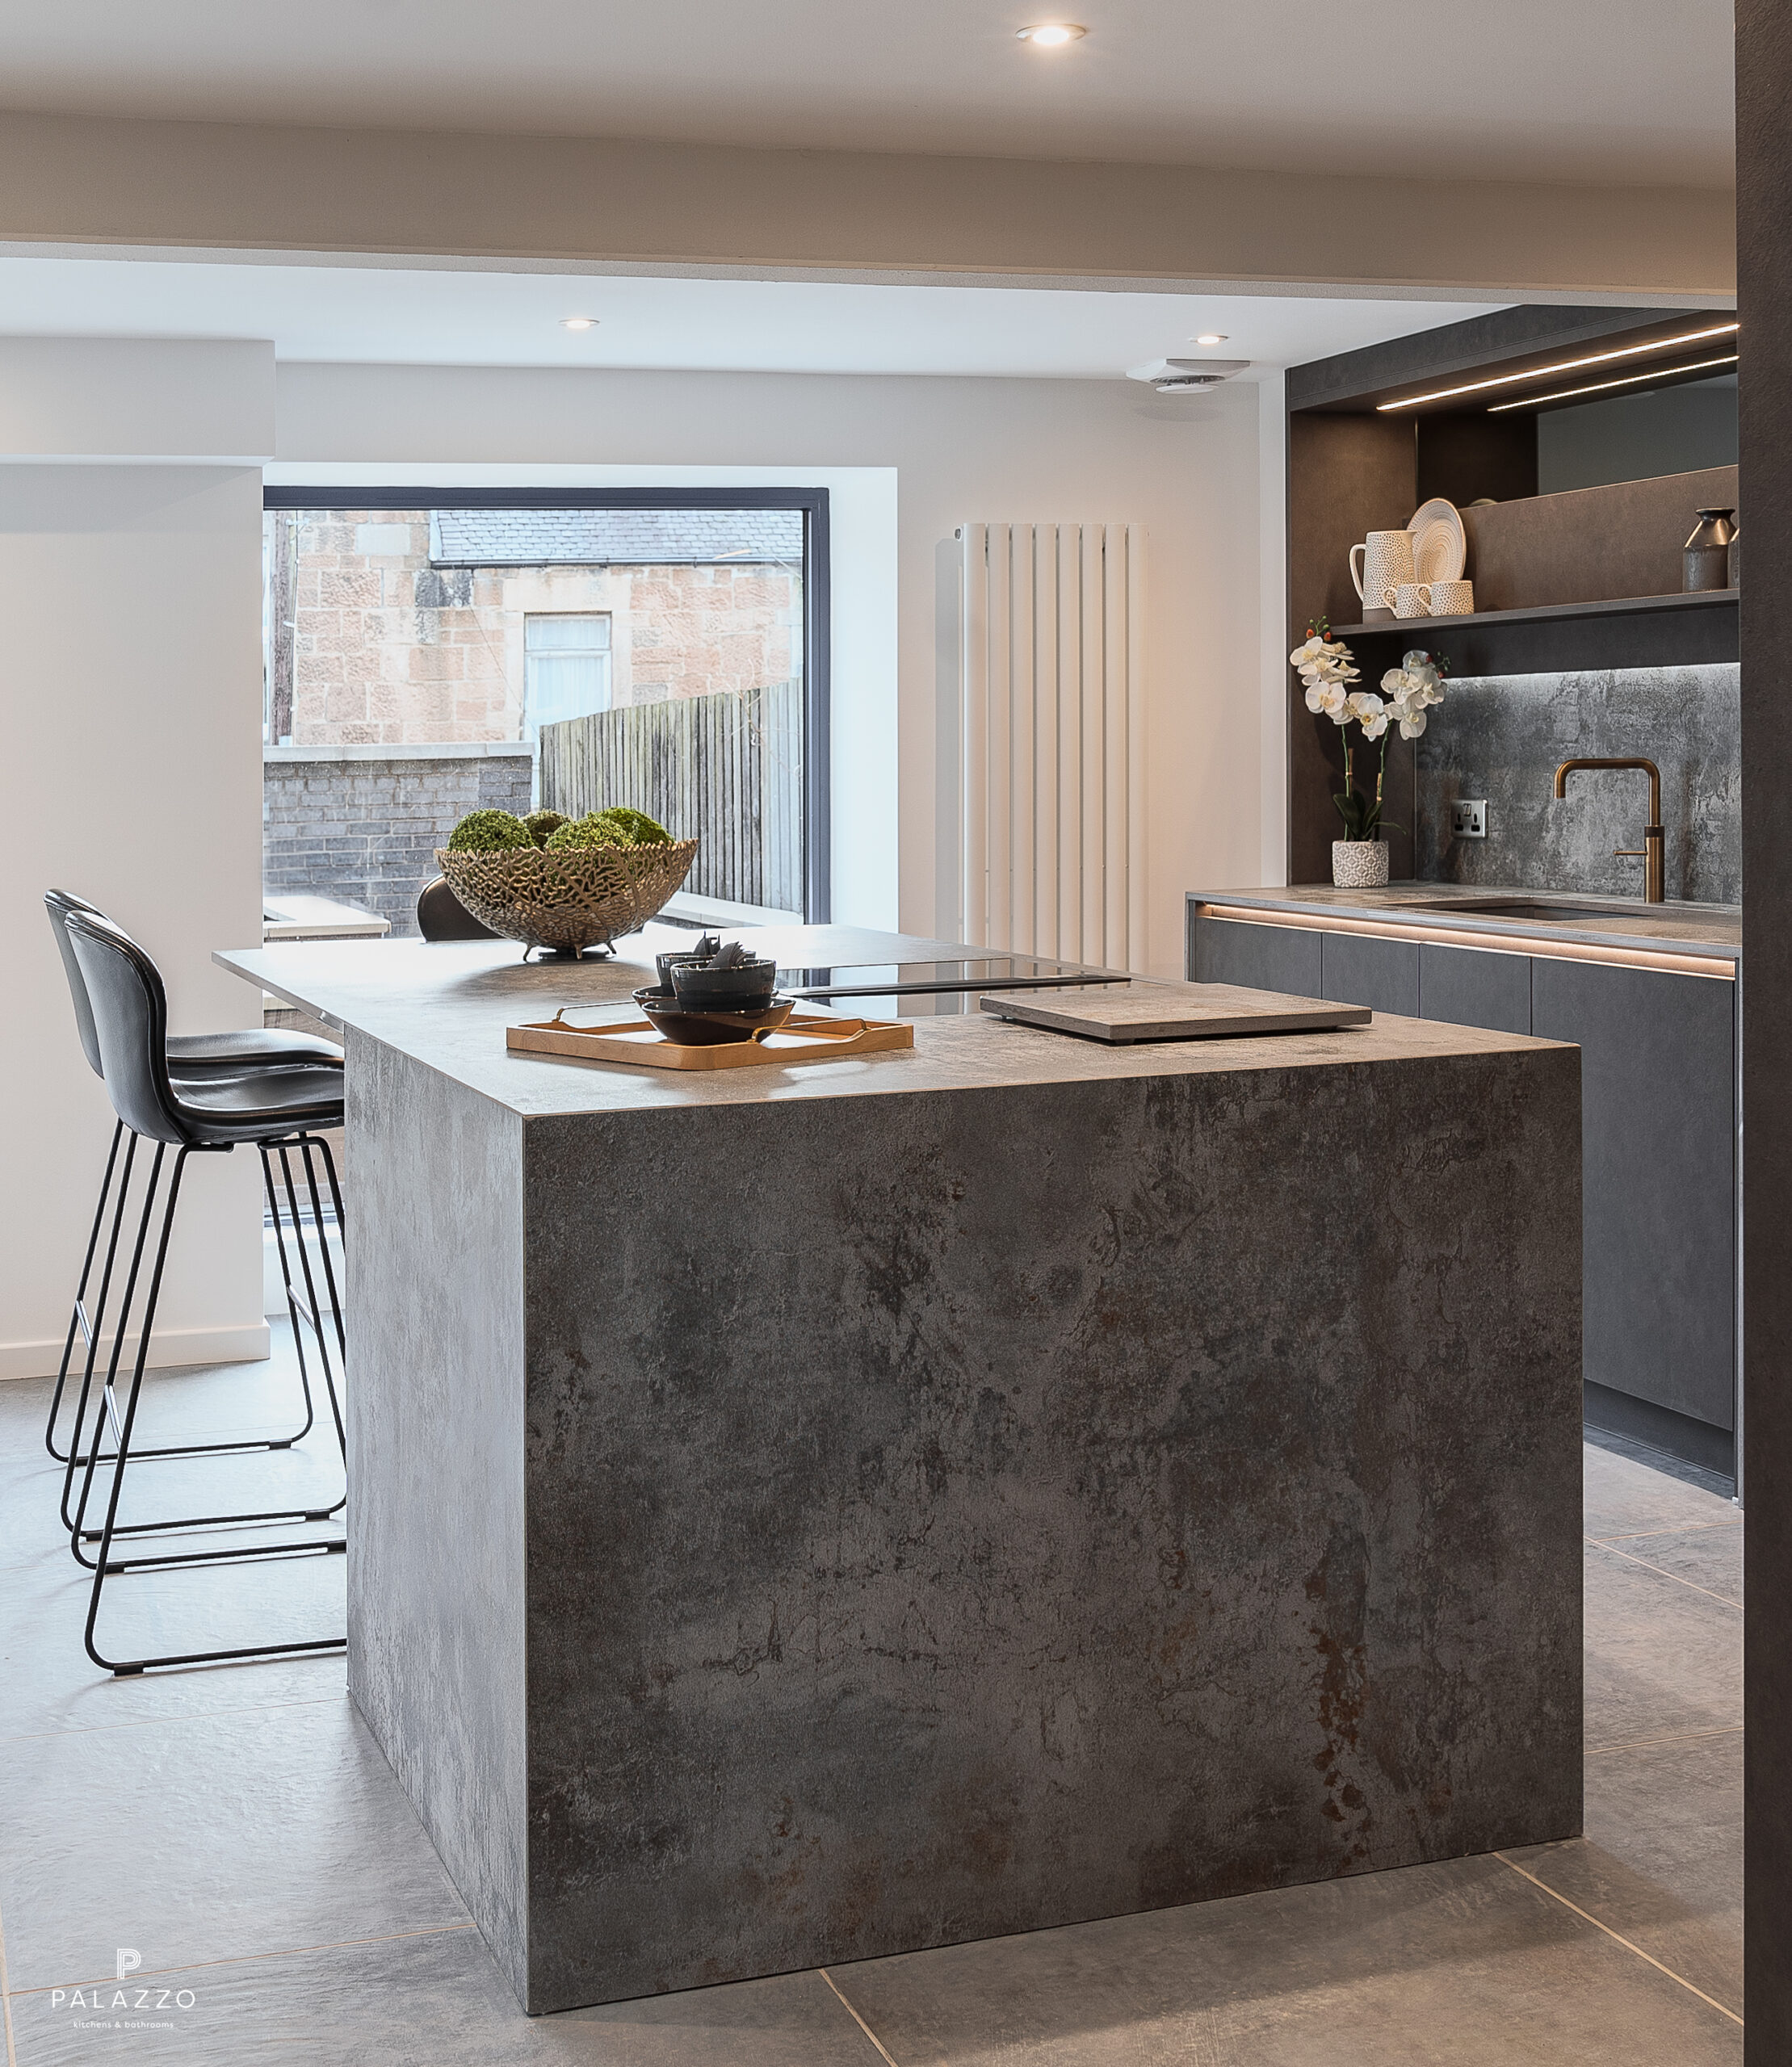 Image 6: Take a look at this Glasgow kitchen design